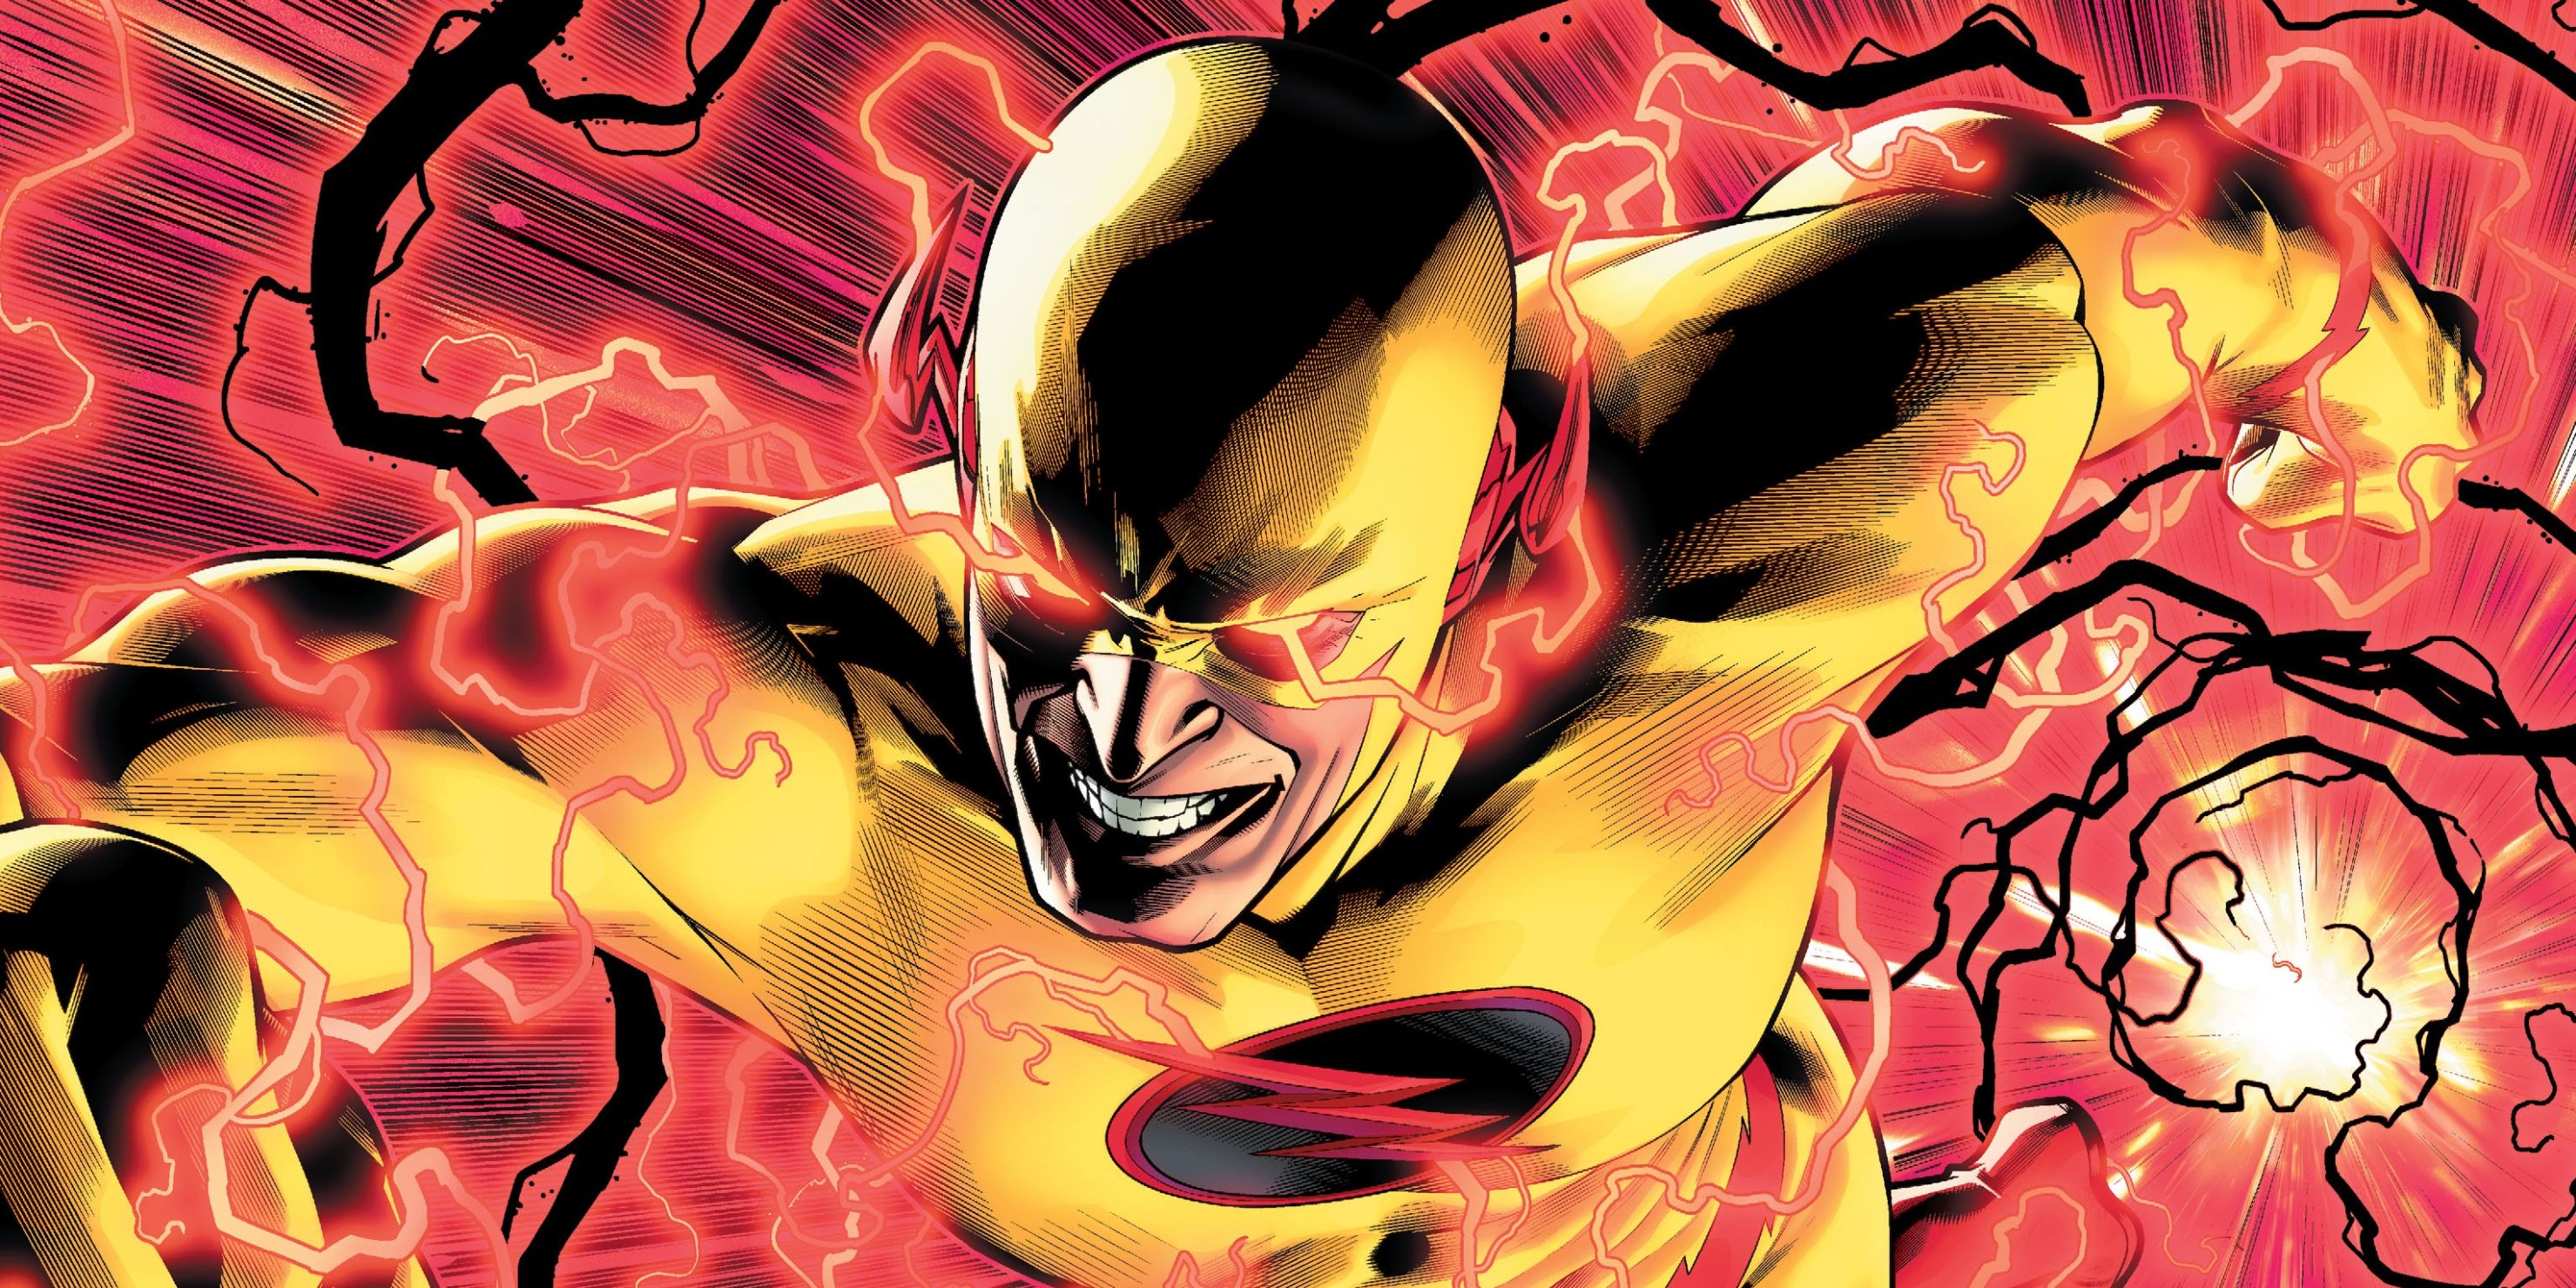 In Flash #753, Barry Allen has to find his arch-nemesis throughout the time...